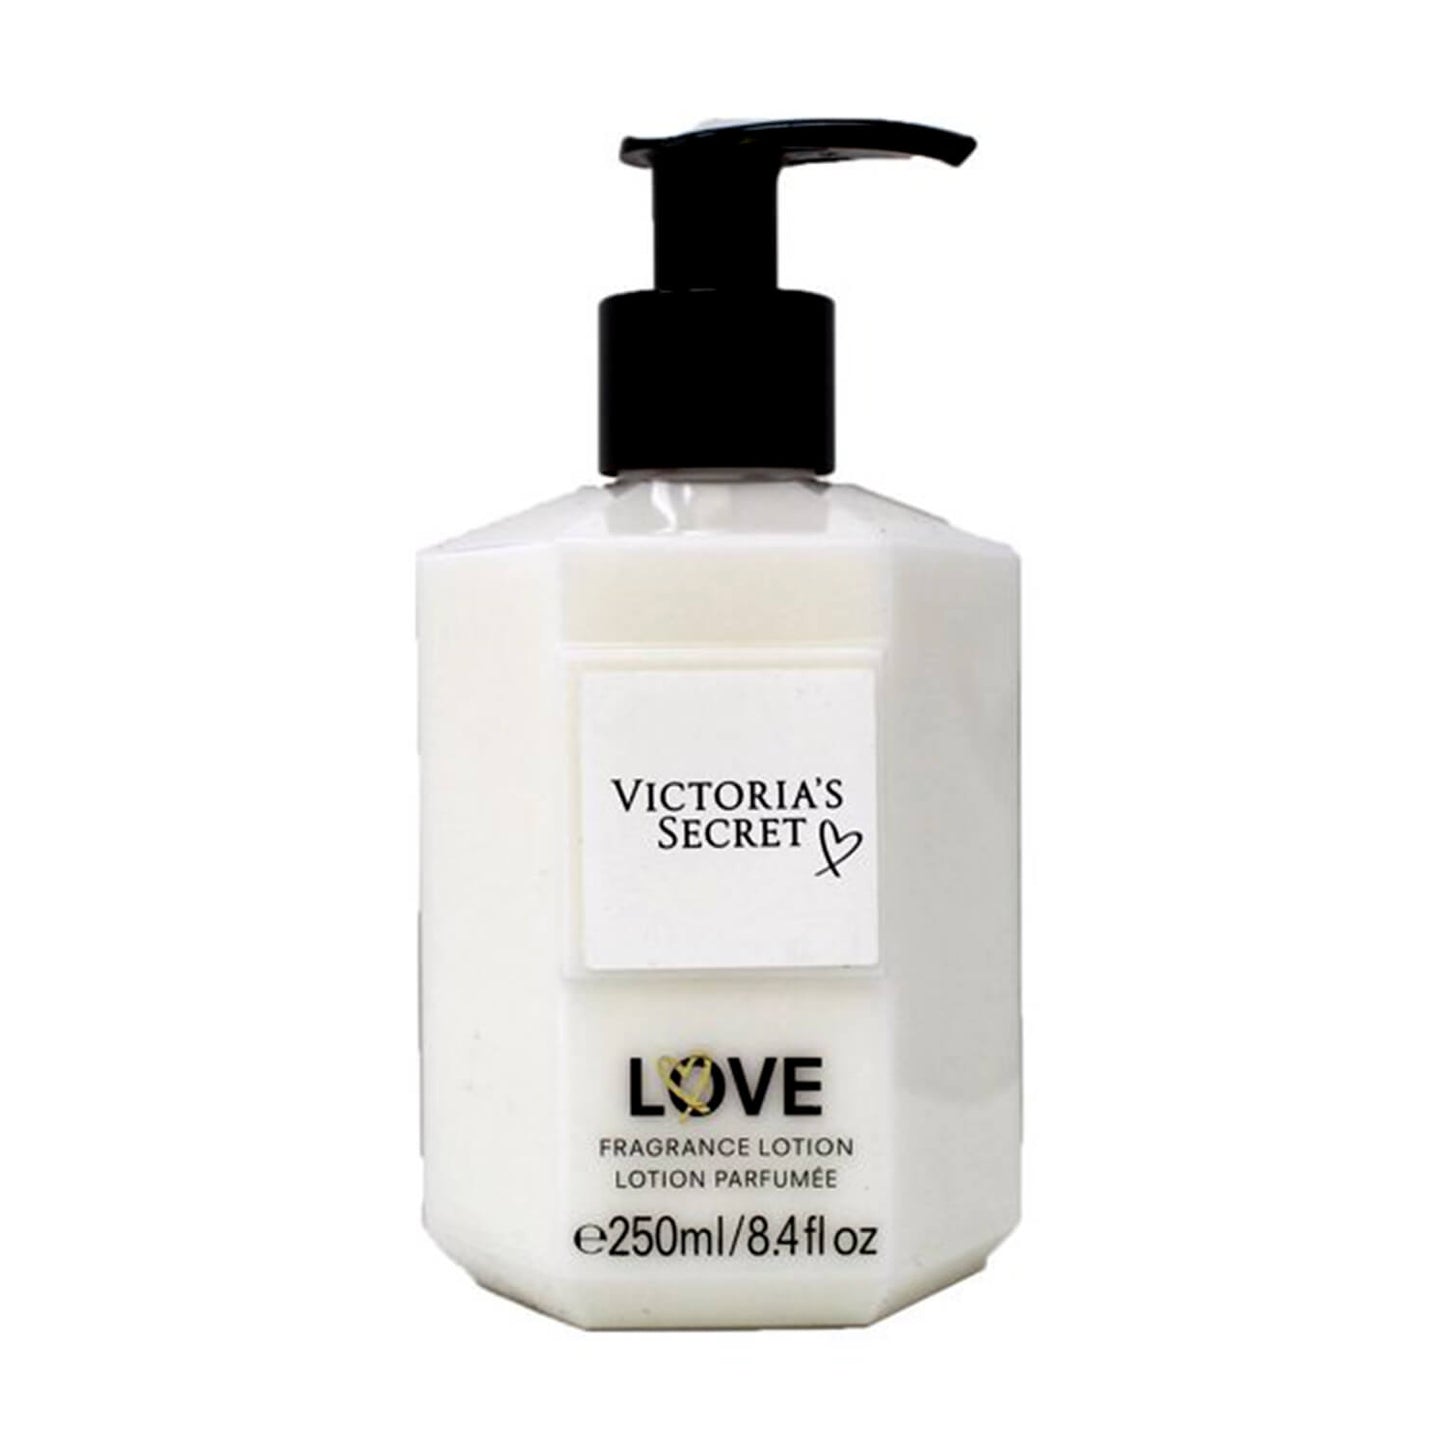 Victoria's Secret Fragrance Lotion - Love available at Heygirl.pk for delivery in Karachi, Lahore, Islamabad across Pakistan.